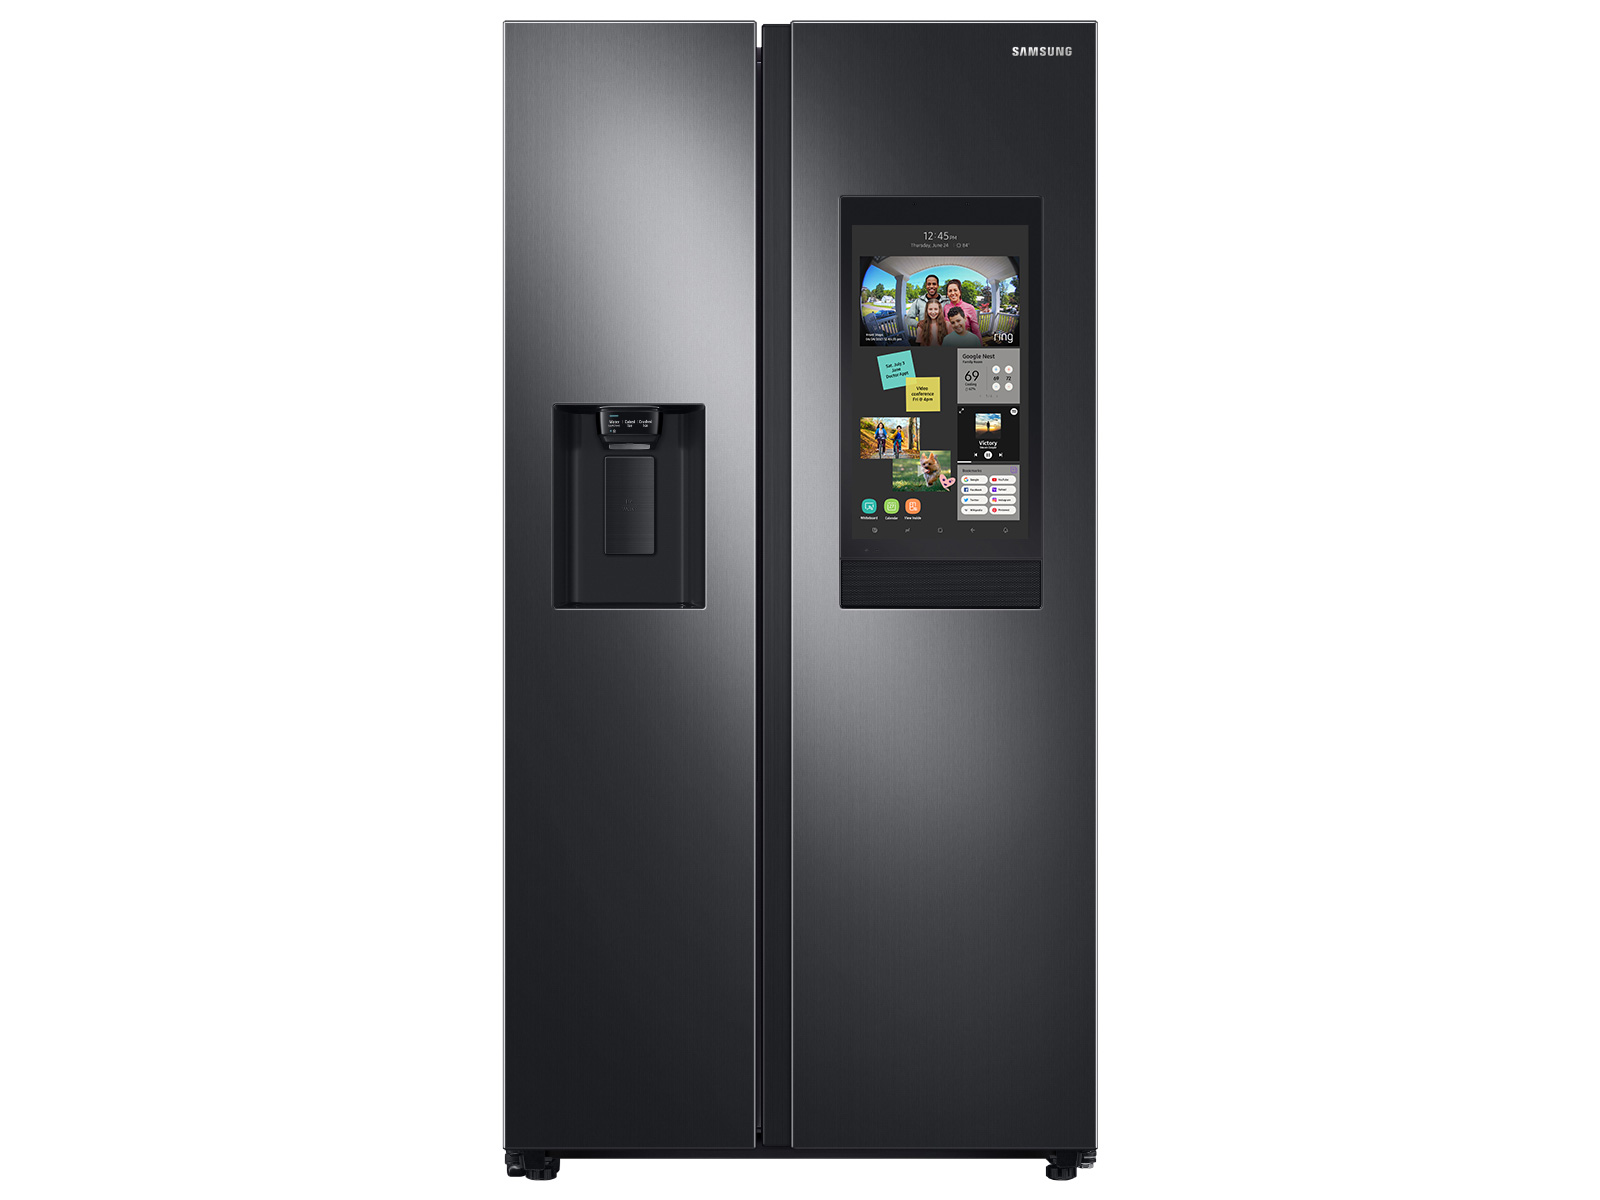 Photos - Fridge Samsung 26.7 cu. ft. Large Capacity Side-by-Side Refrigerator with Touch S 